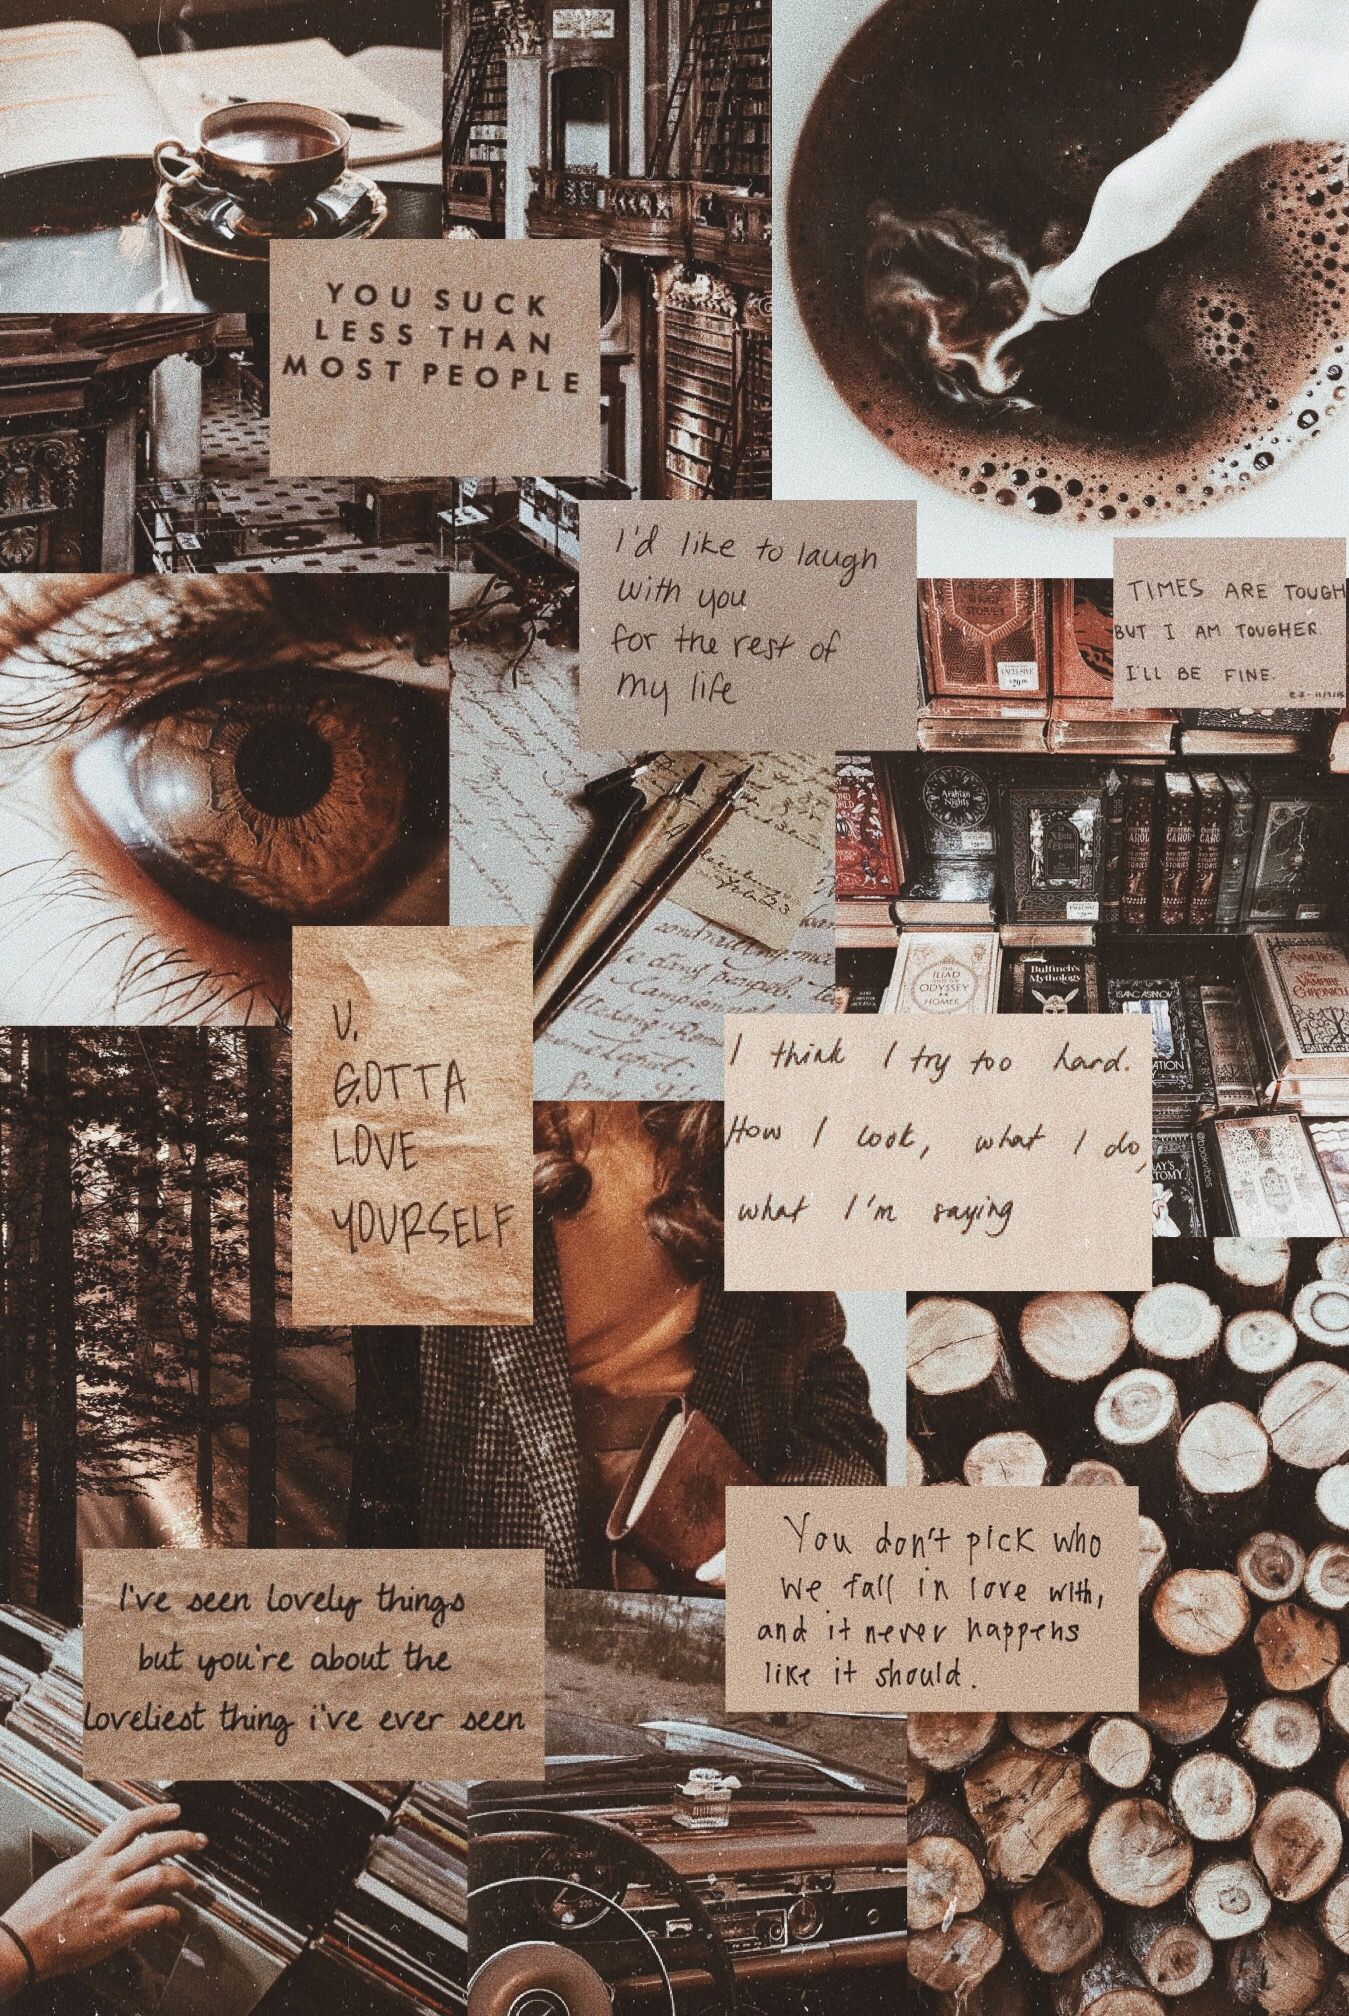 A collage of pictures with coffee and books - Light brown